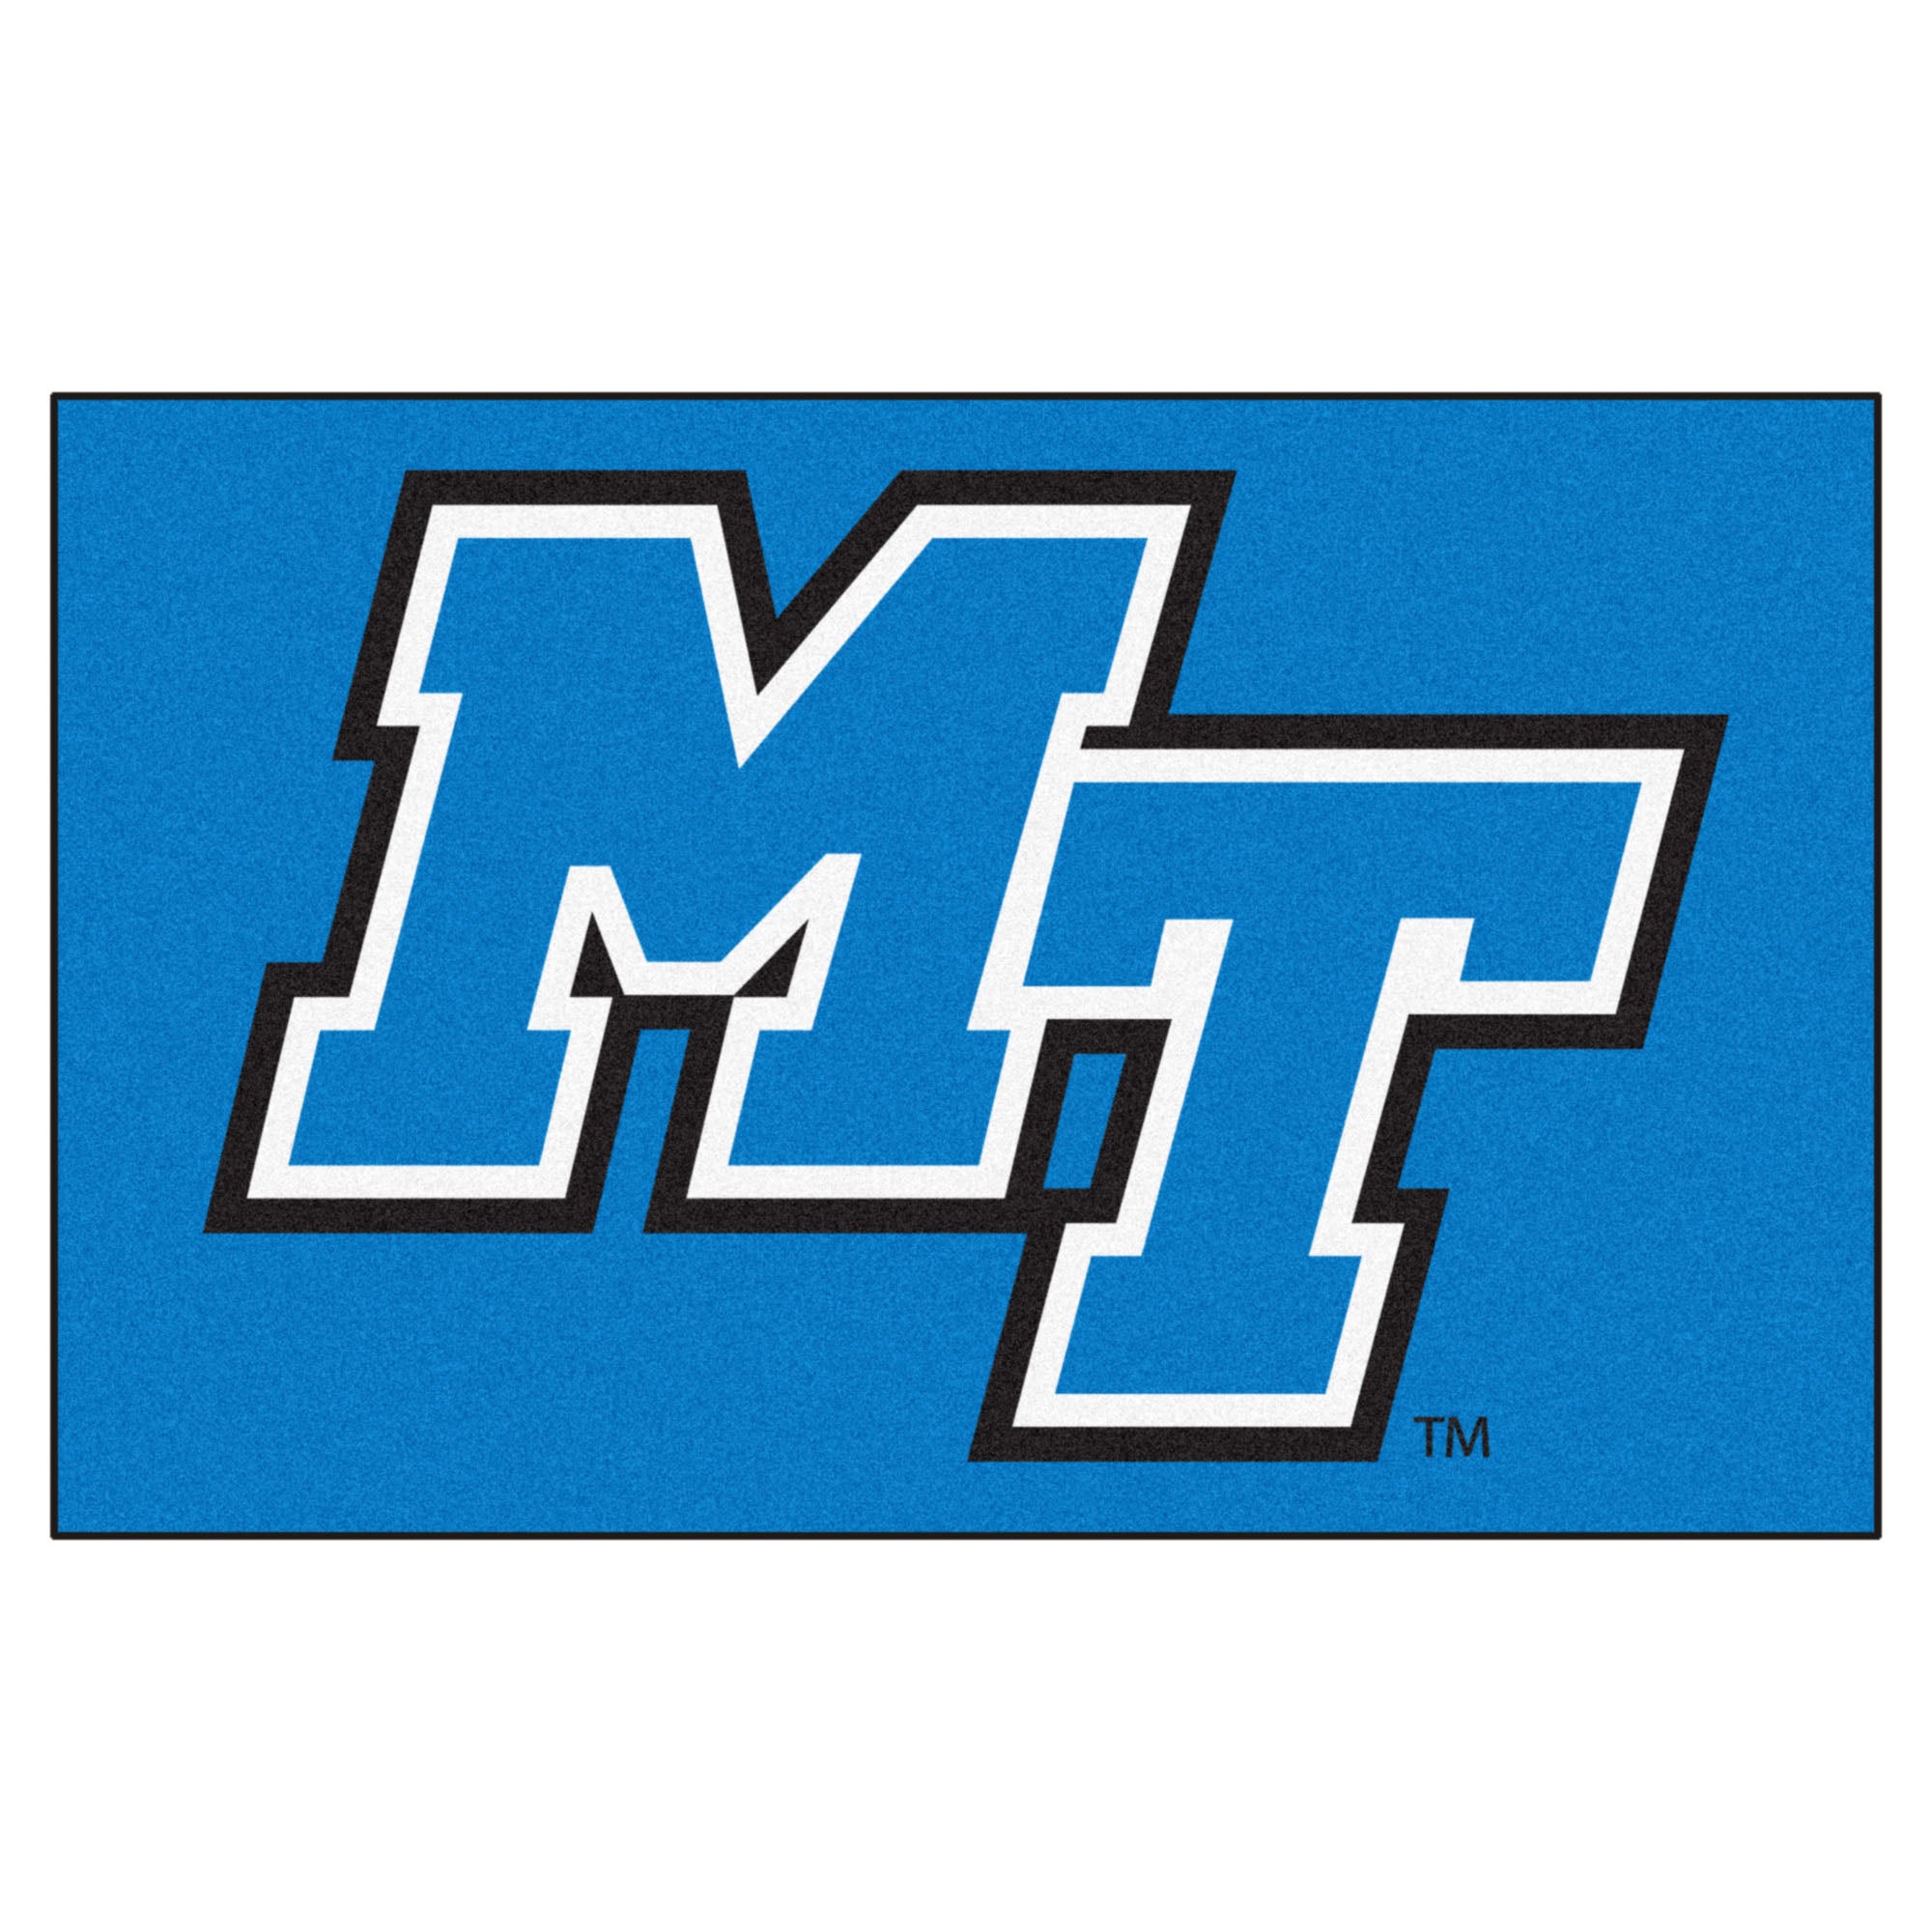 FANMATS, Middle Tennessee State University Rug - 5ft. x 8ft.